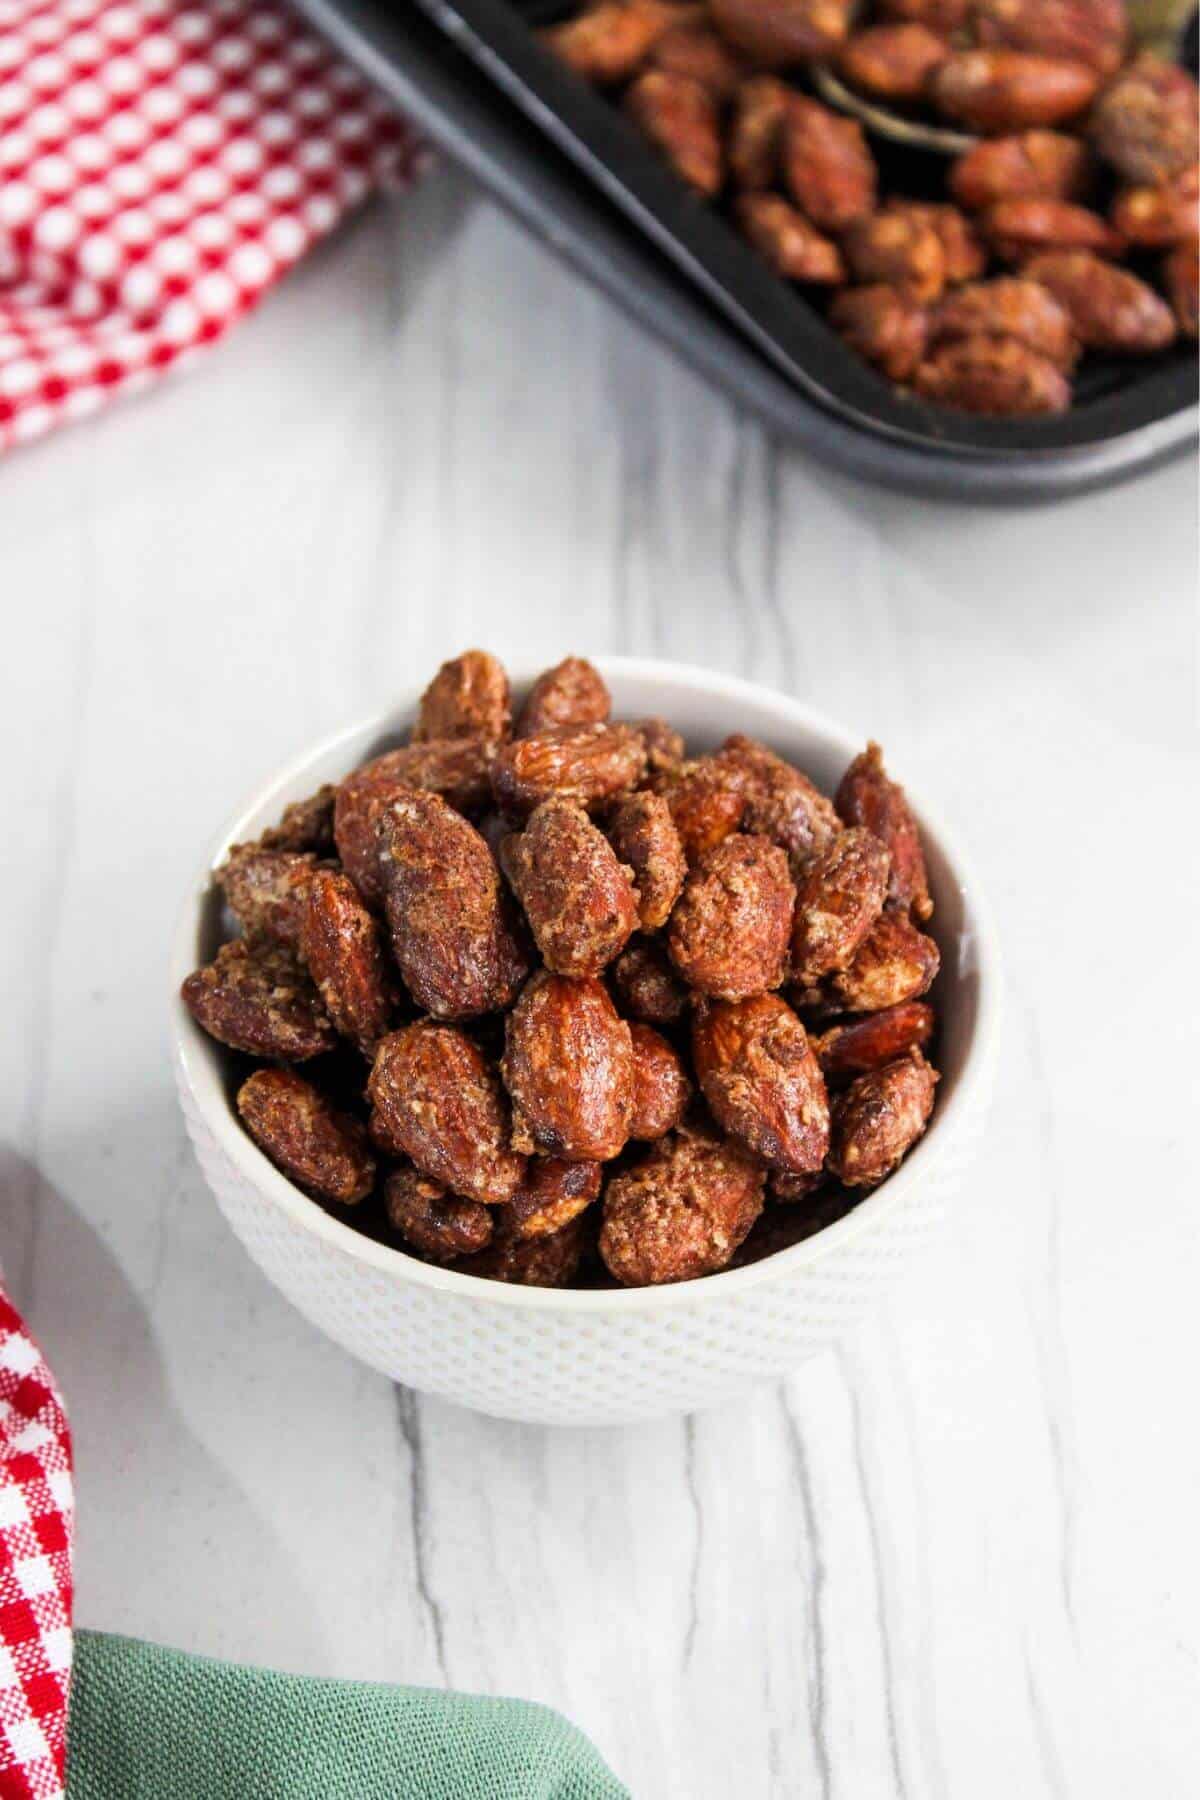 Air fryer candied almonds in a white bowl with a red and white checkered tablecloth.